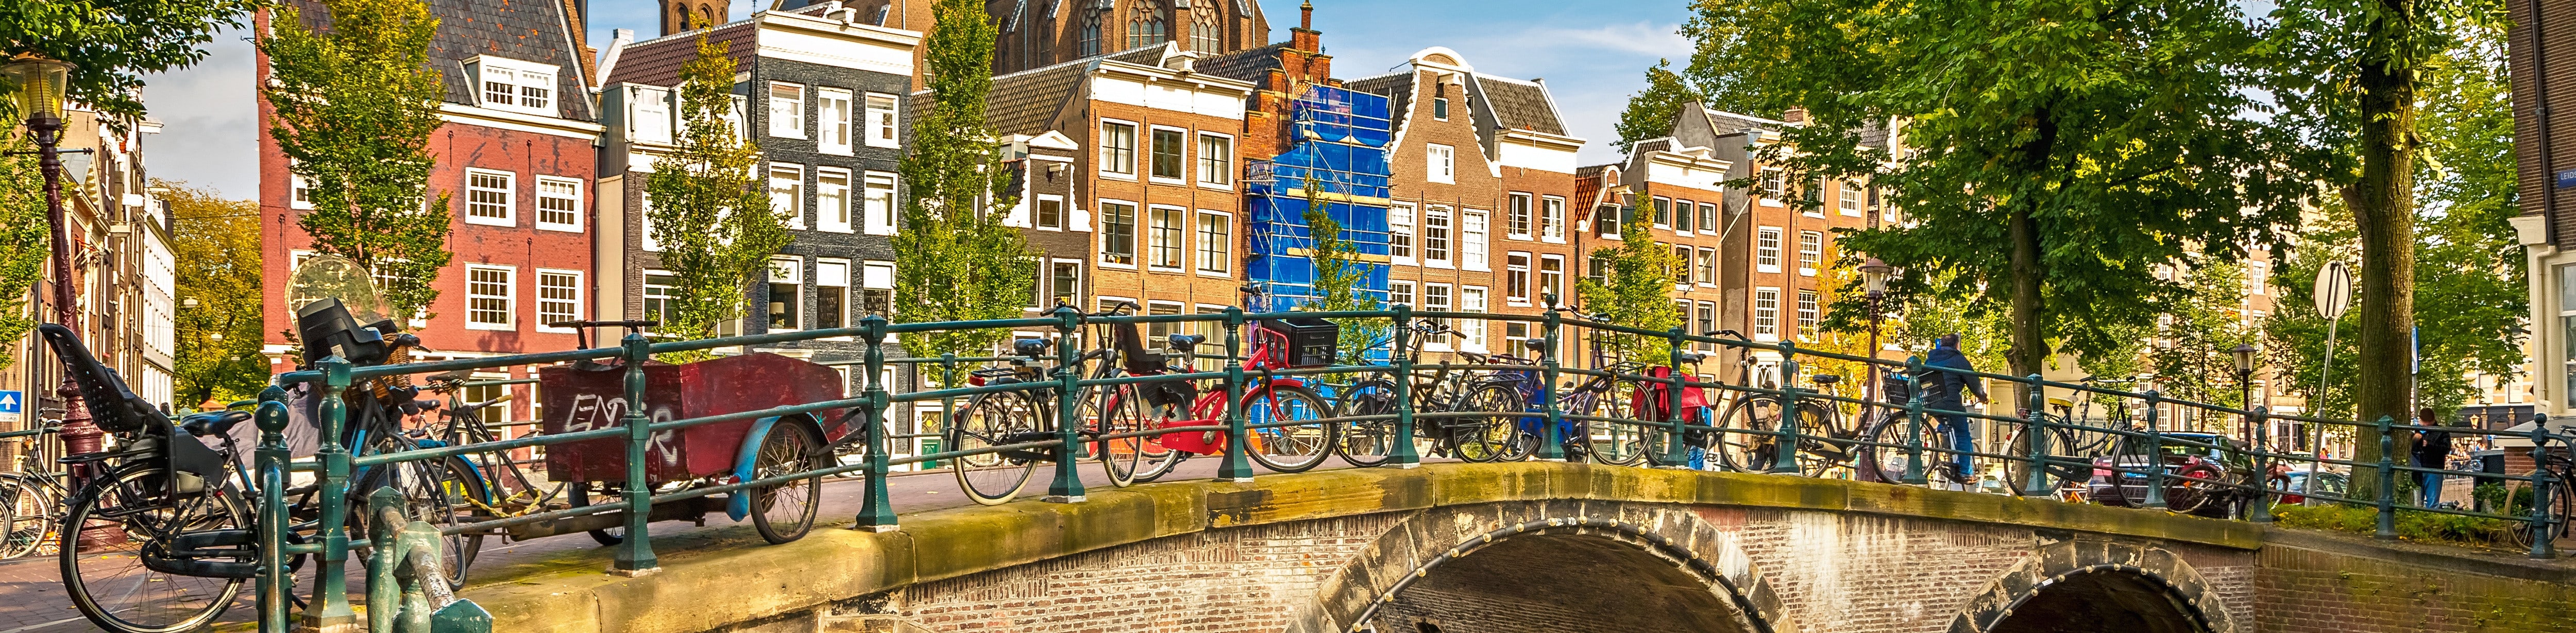 phd programs in the netherlands